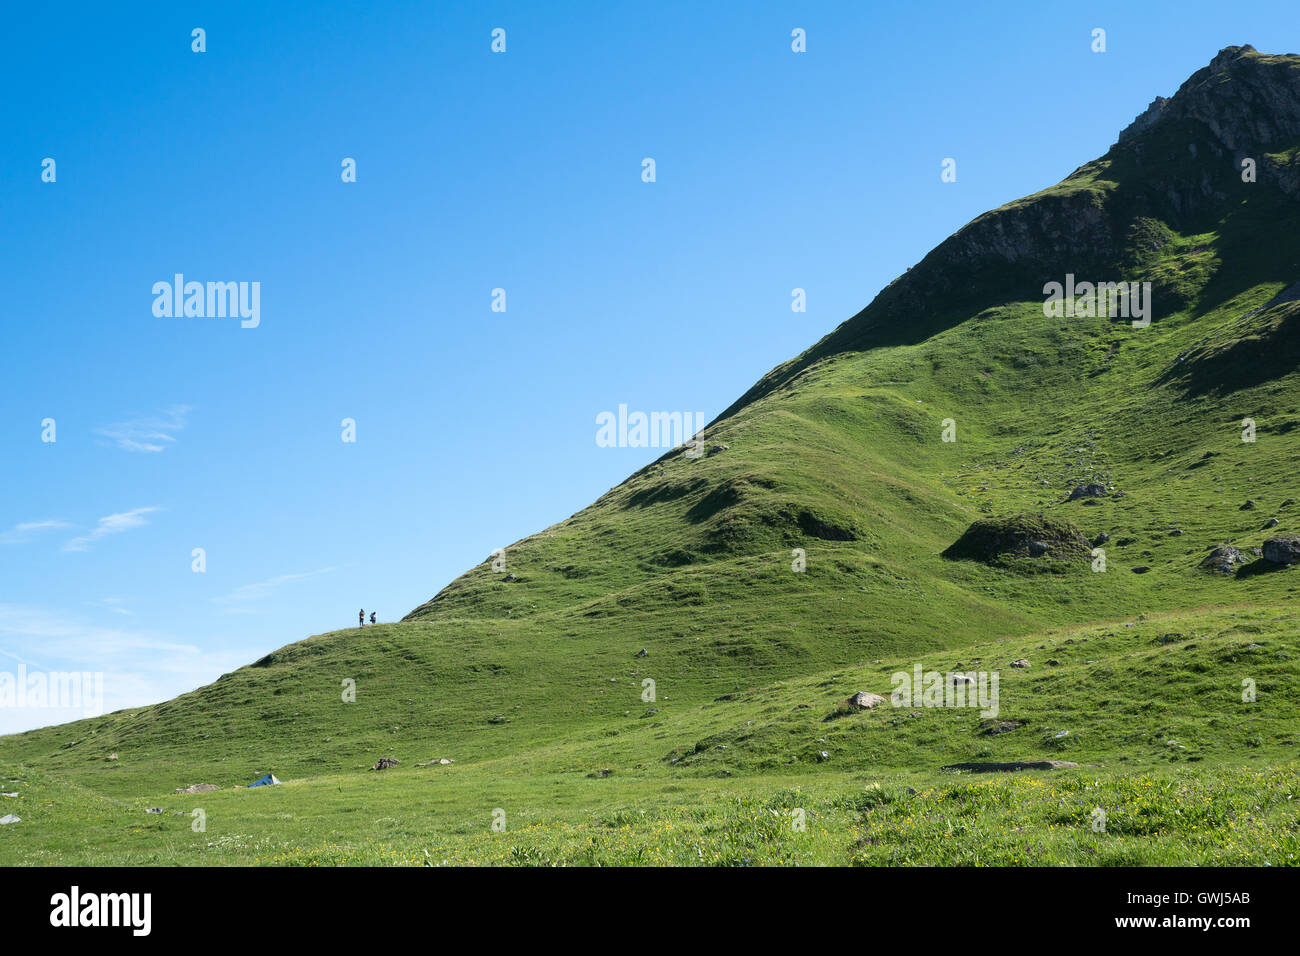 2 people watching the mountains at the foot of a hill, Beaufortin, France, Alpes Stock Photo